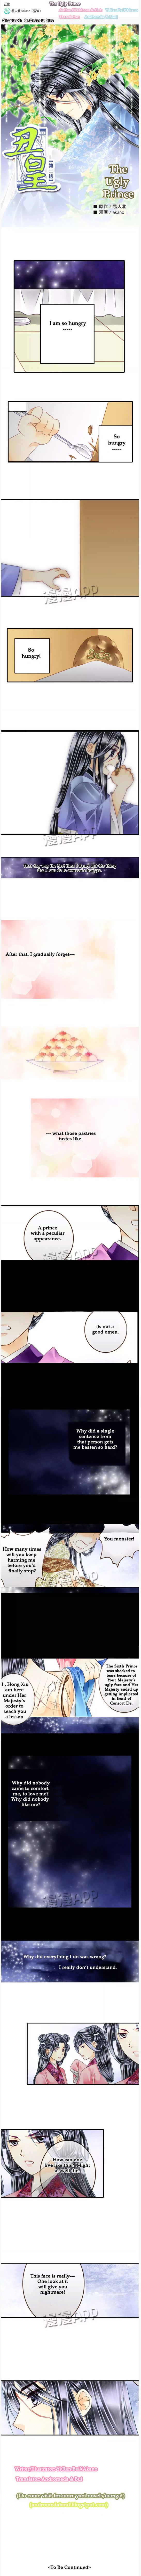 The Ugly Prince - Page 1